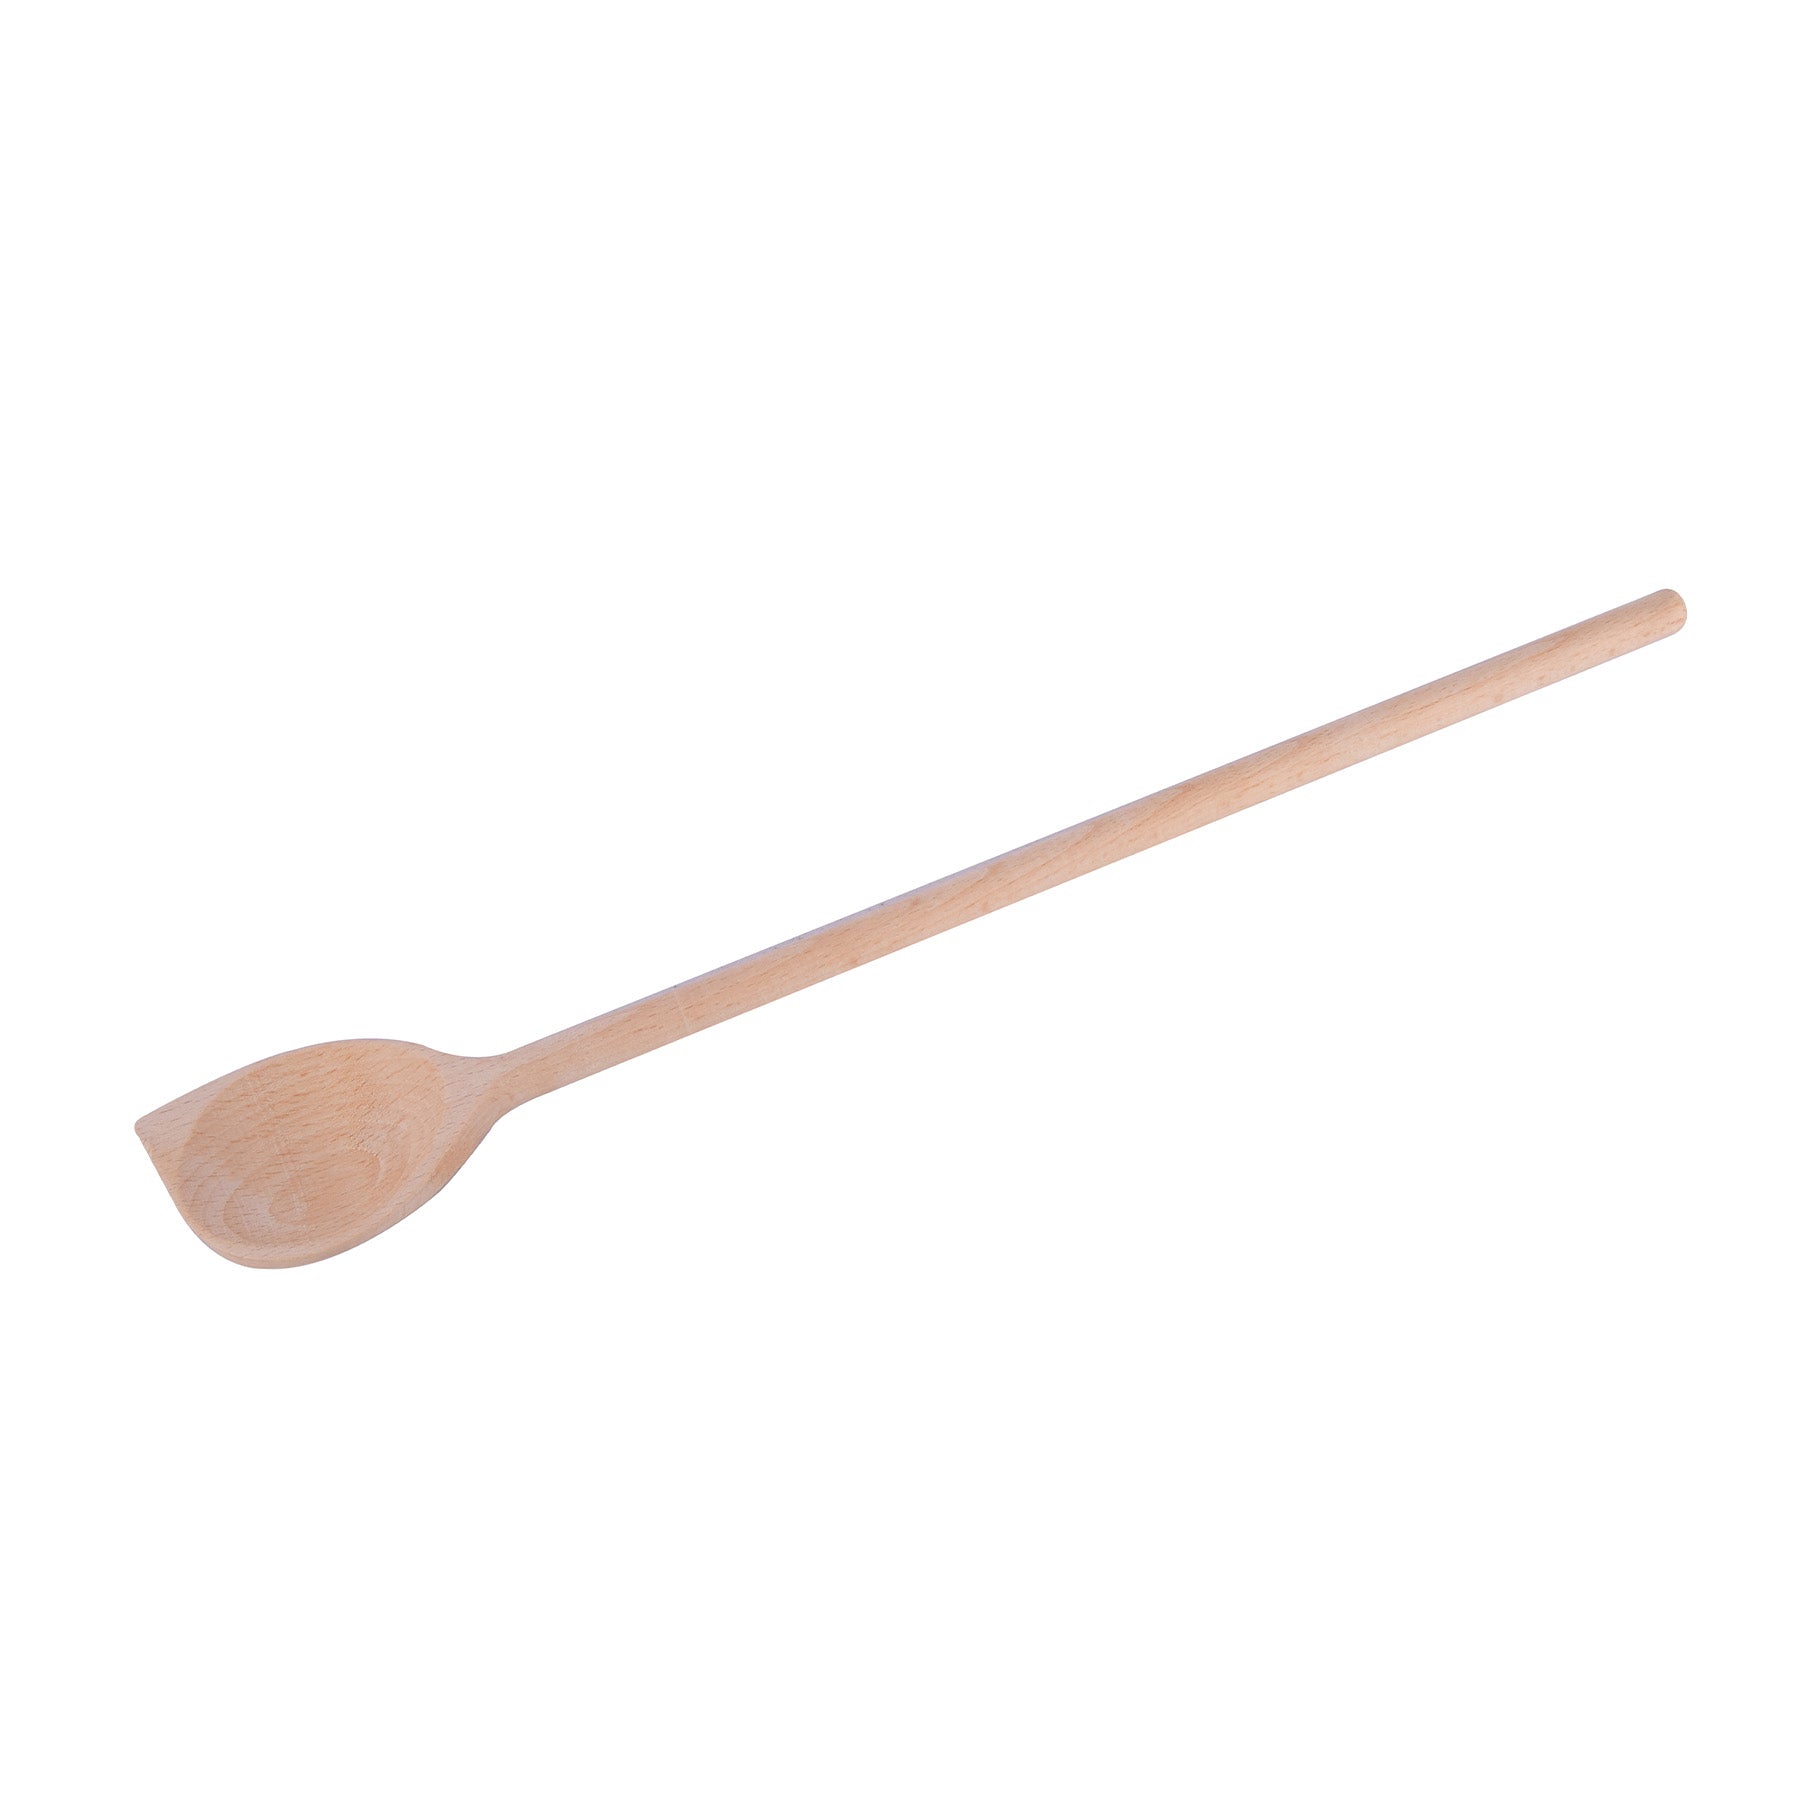 Wooden mixing pointed spoon, NaturalSize: 40 cm